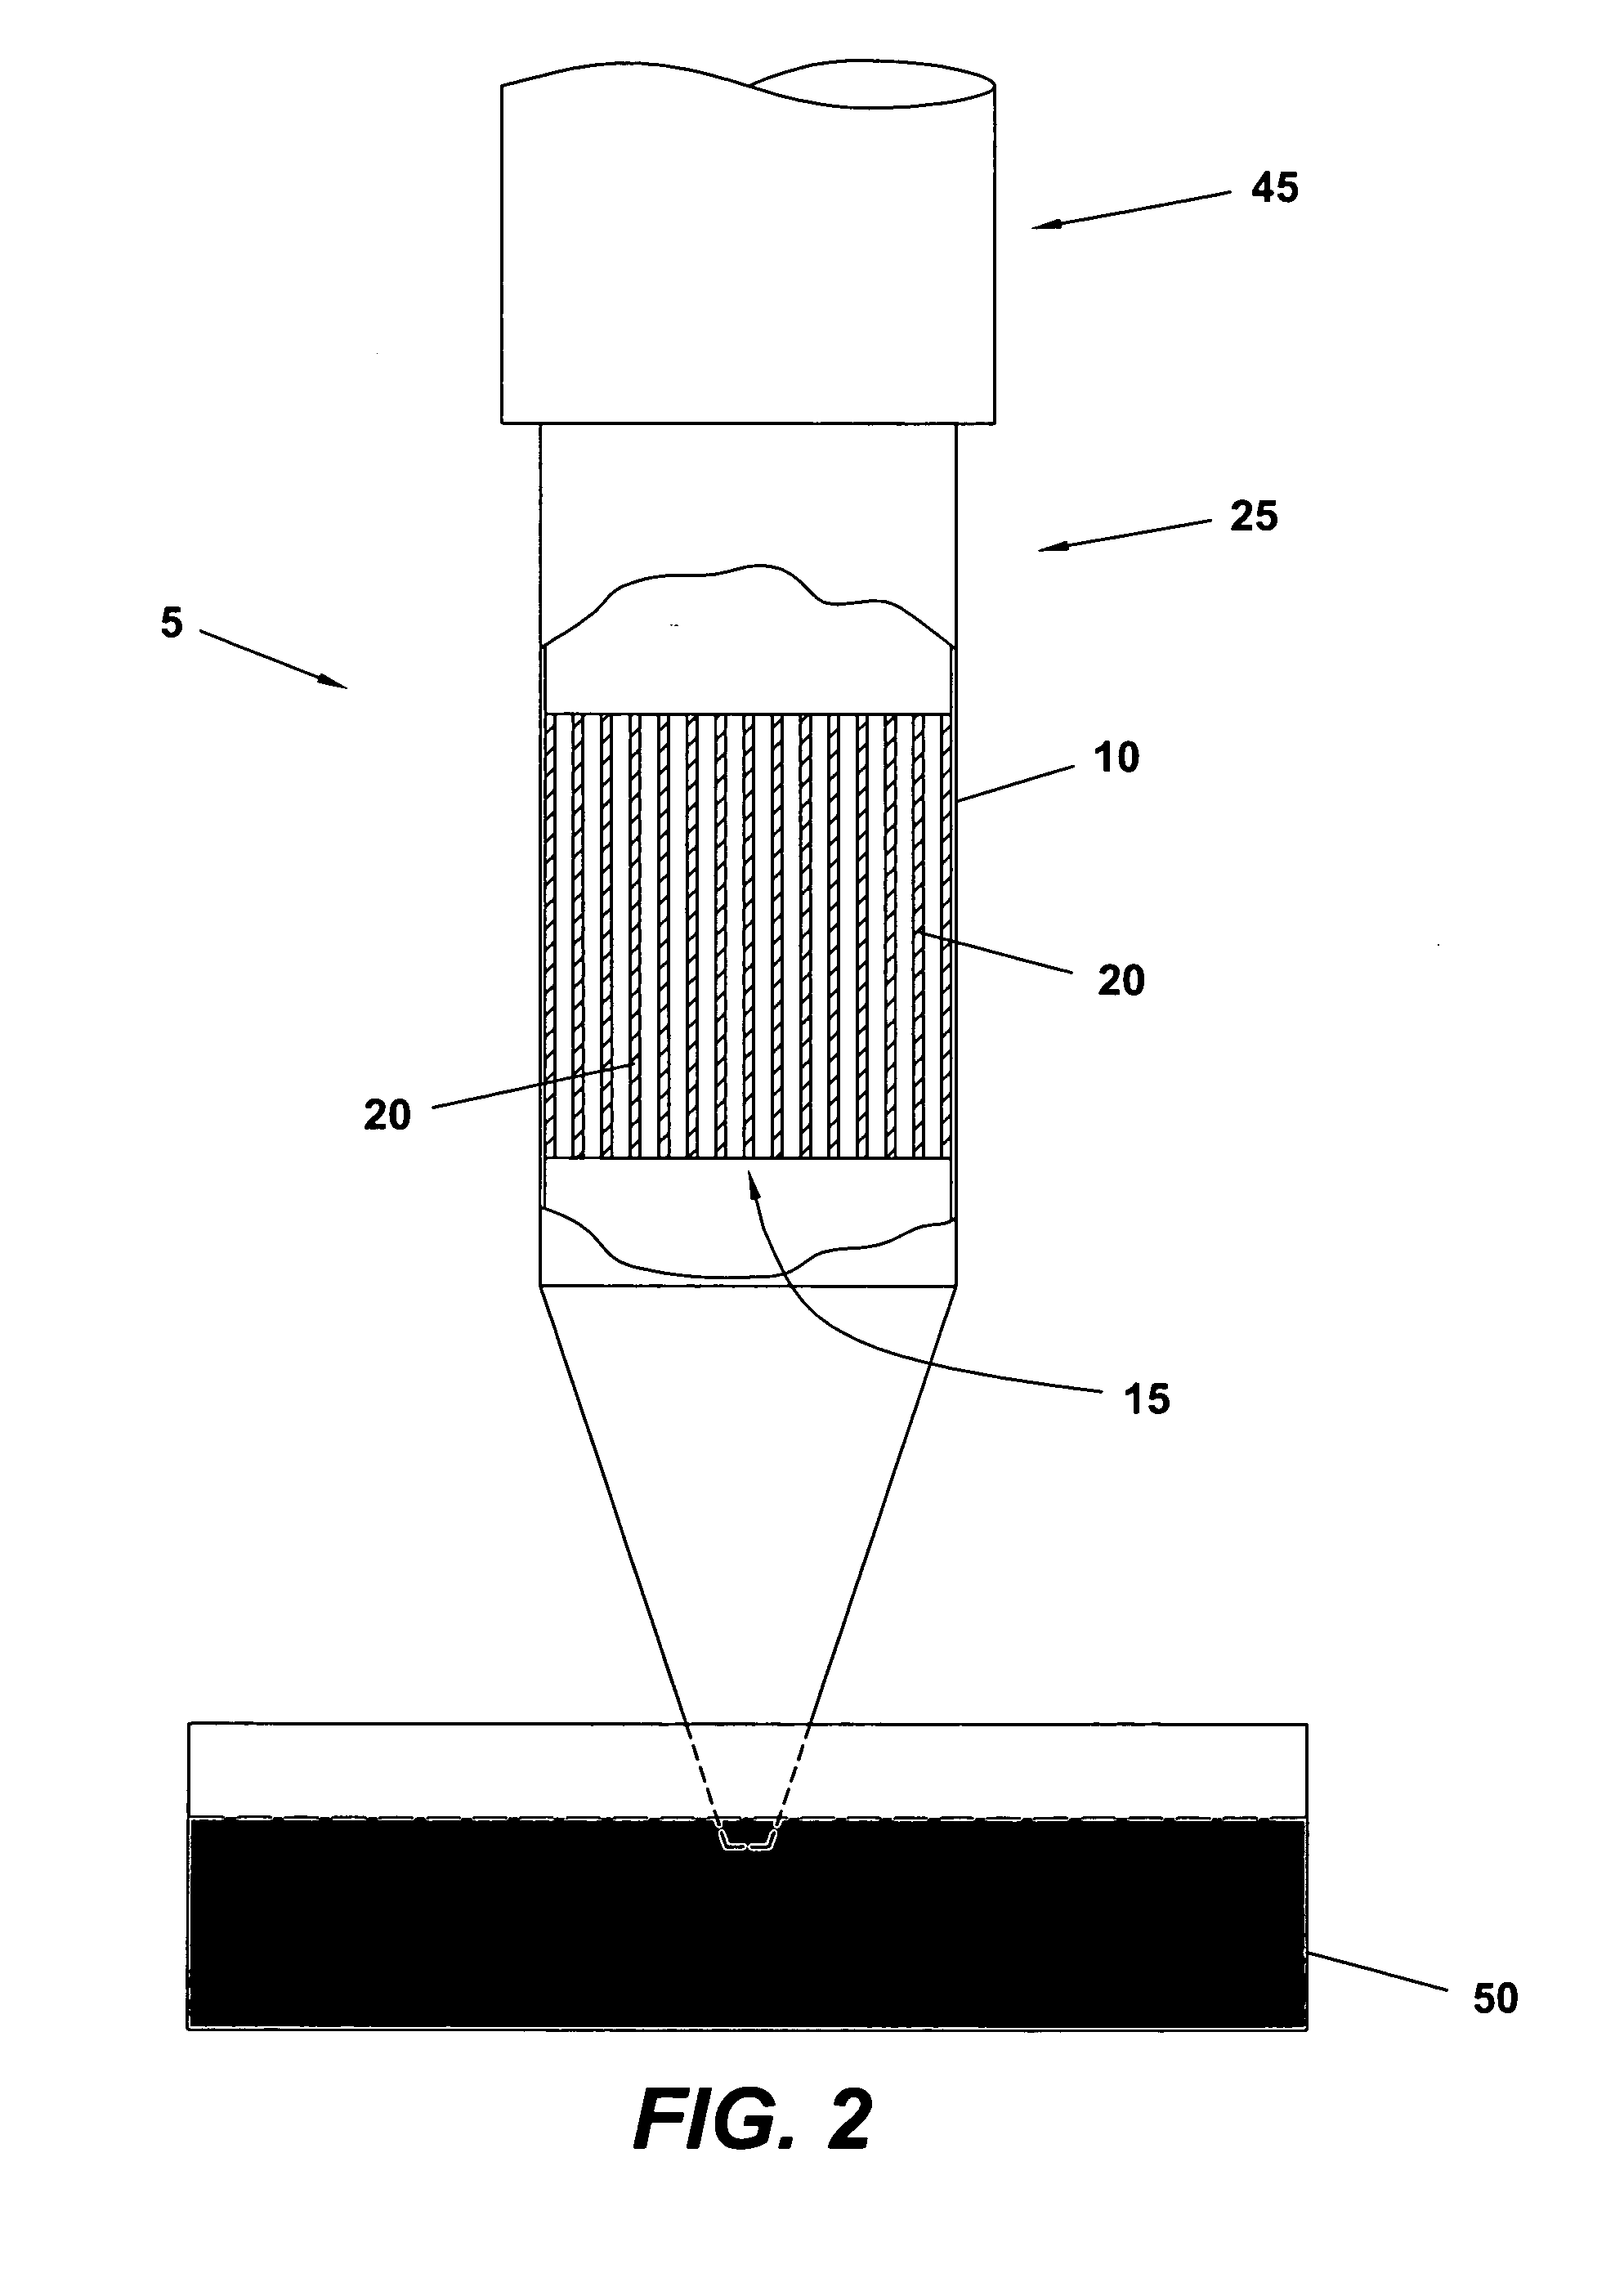 Small volume liquid-liquid extraction device and method of use